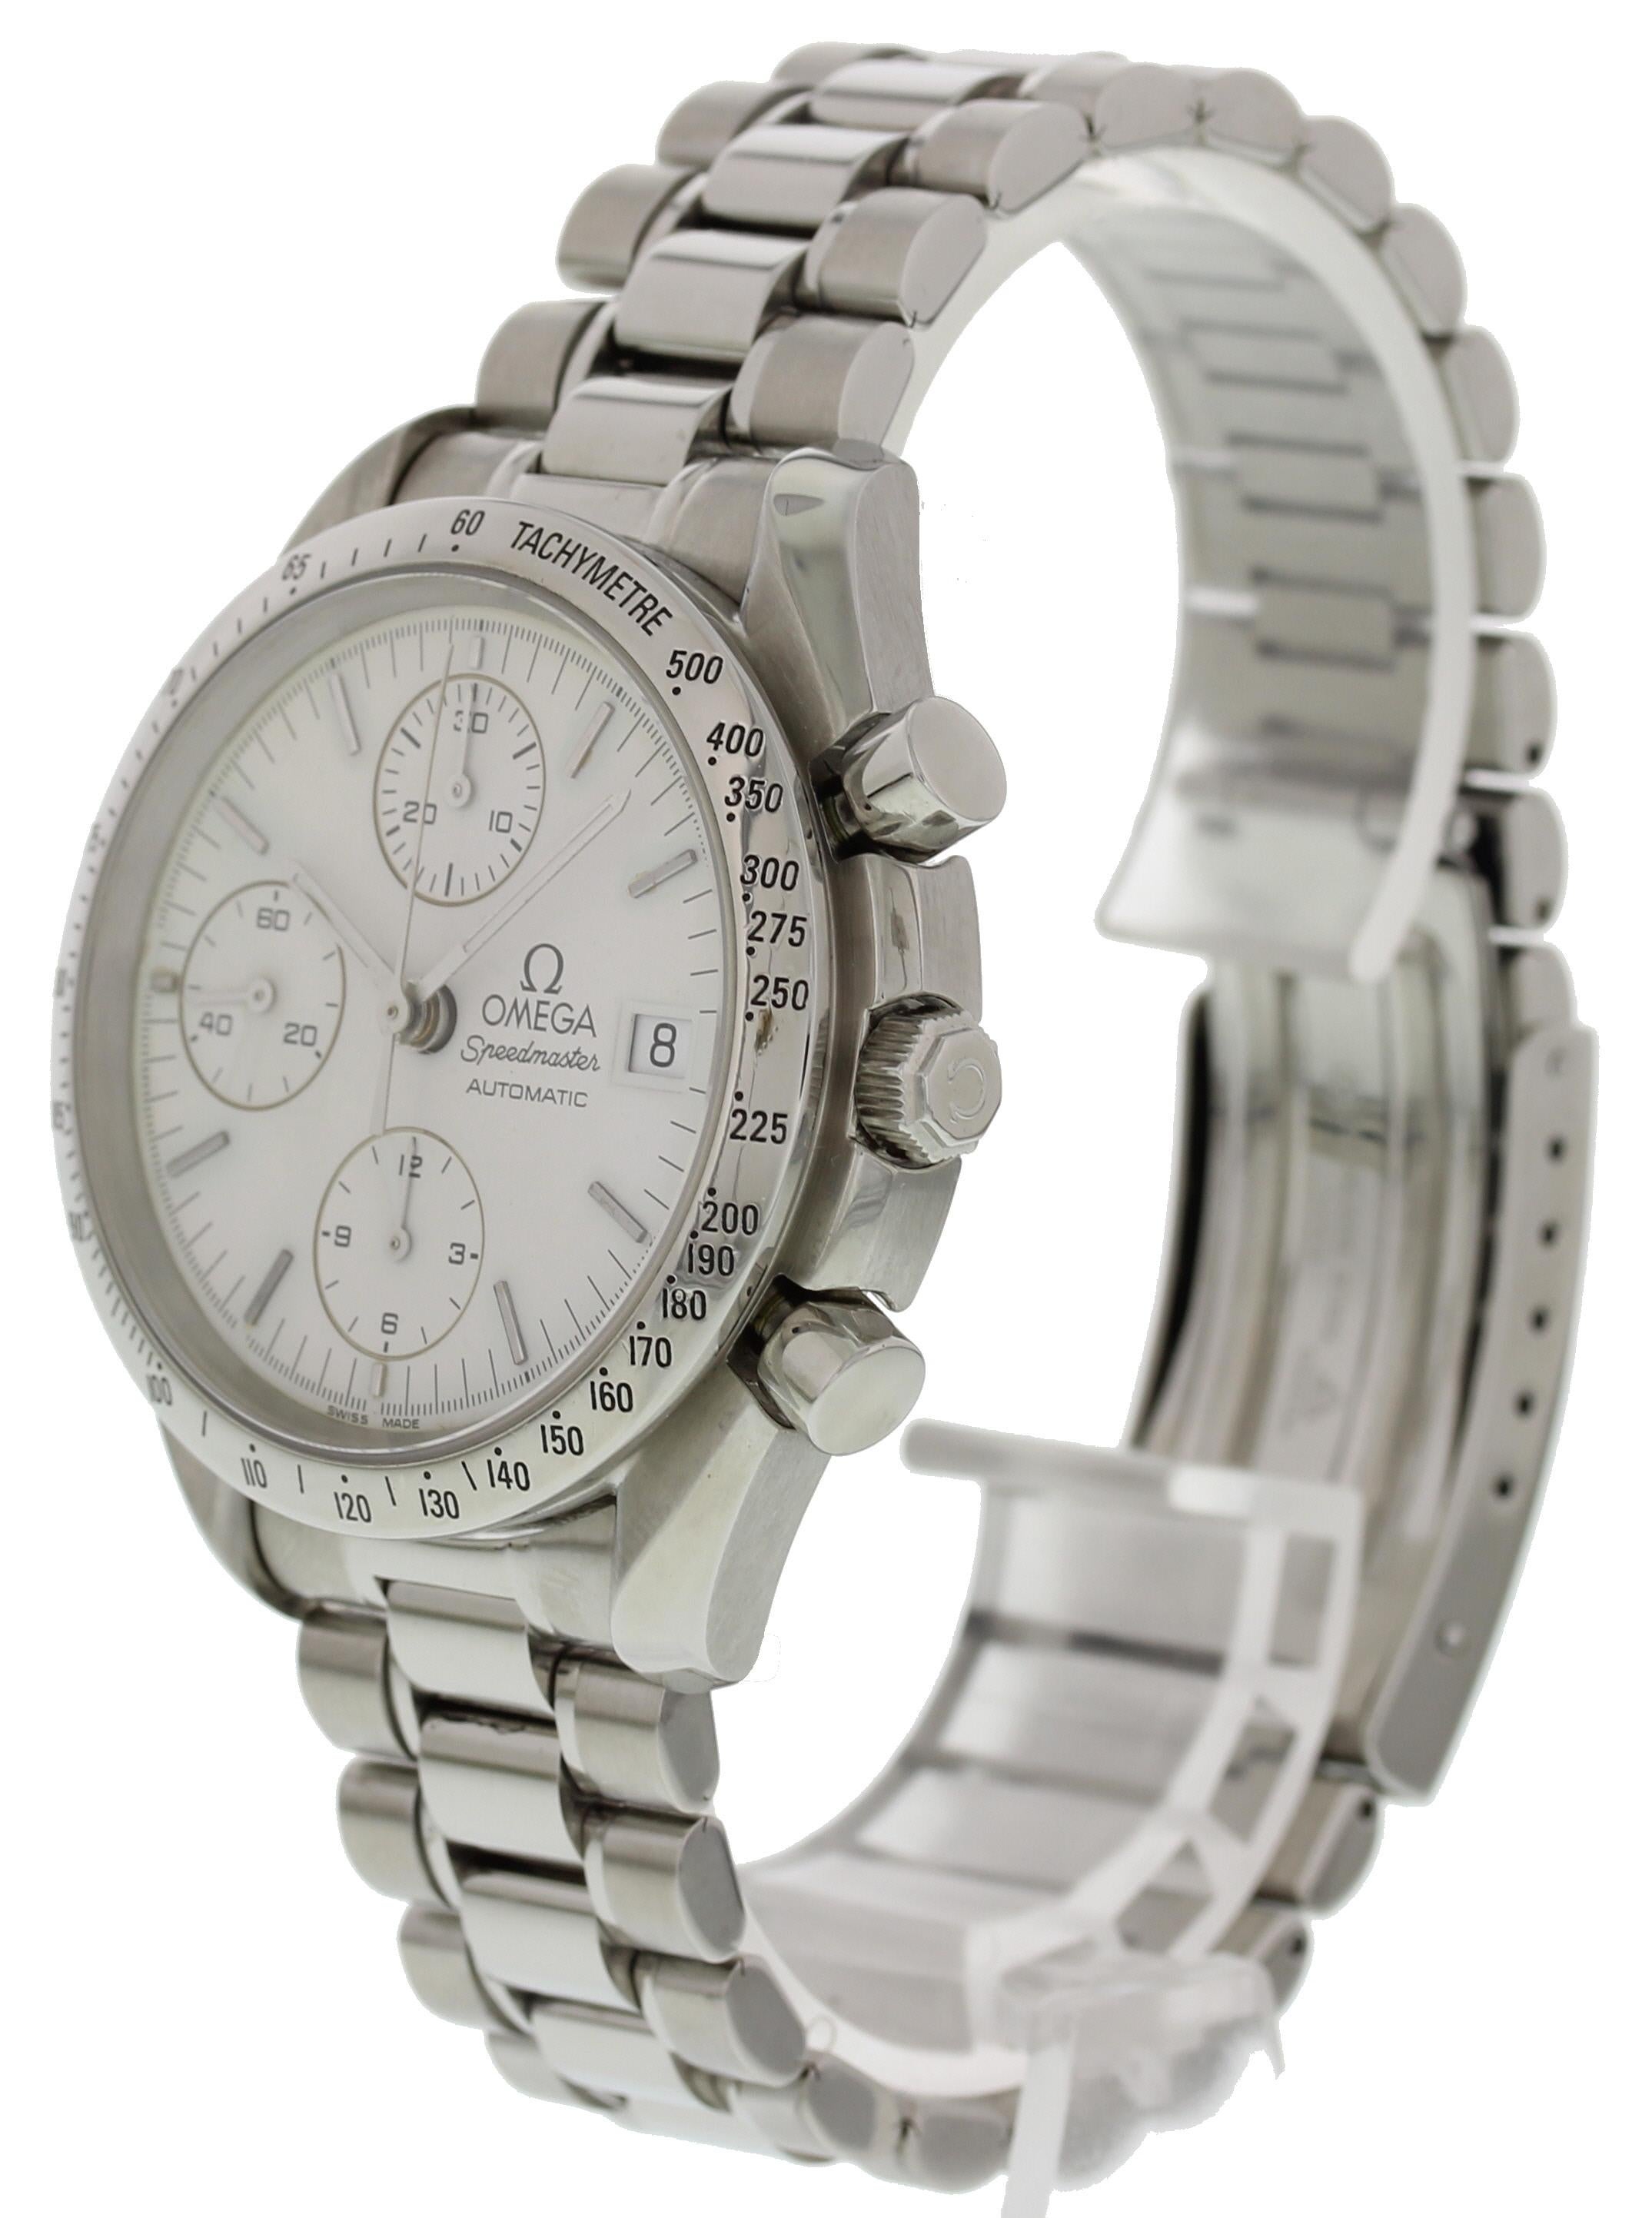 Omega Speedmaster 1750043 Automatic Chronograph In Excellent Condition For Sale In New York, NY